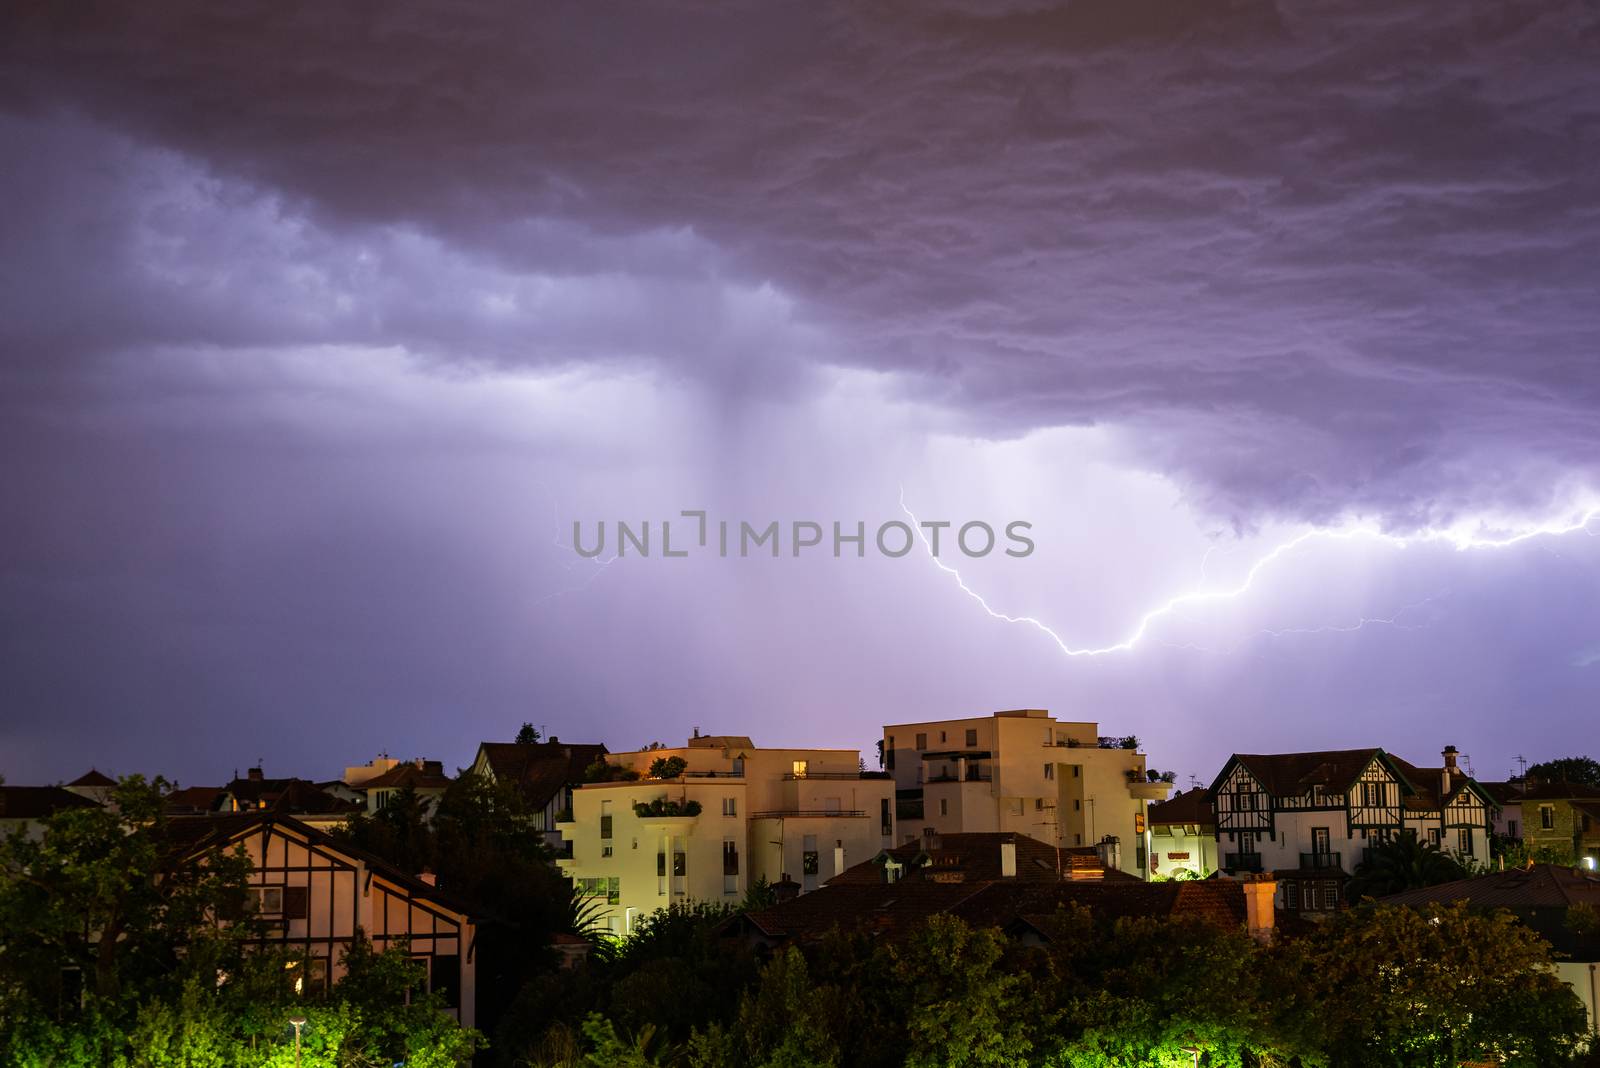 Thunderstorm at night in Bayonne, France